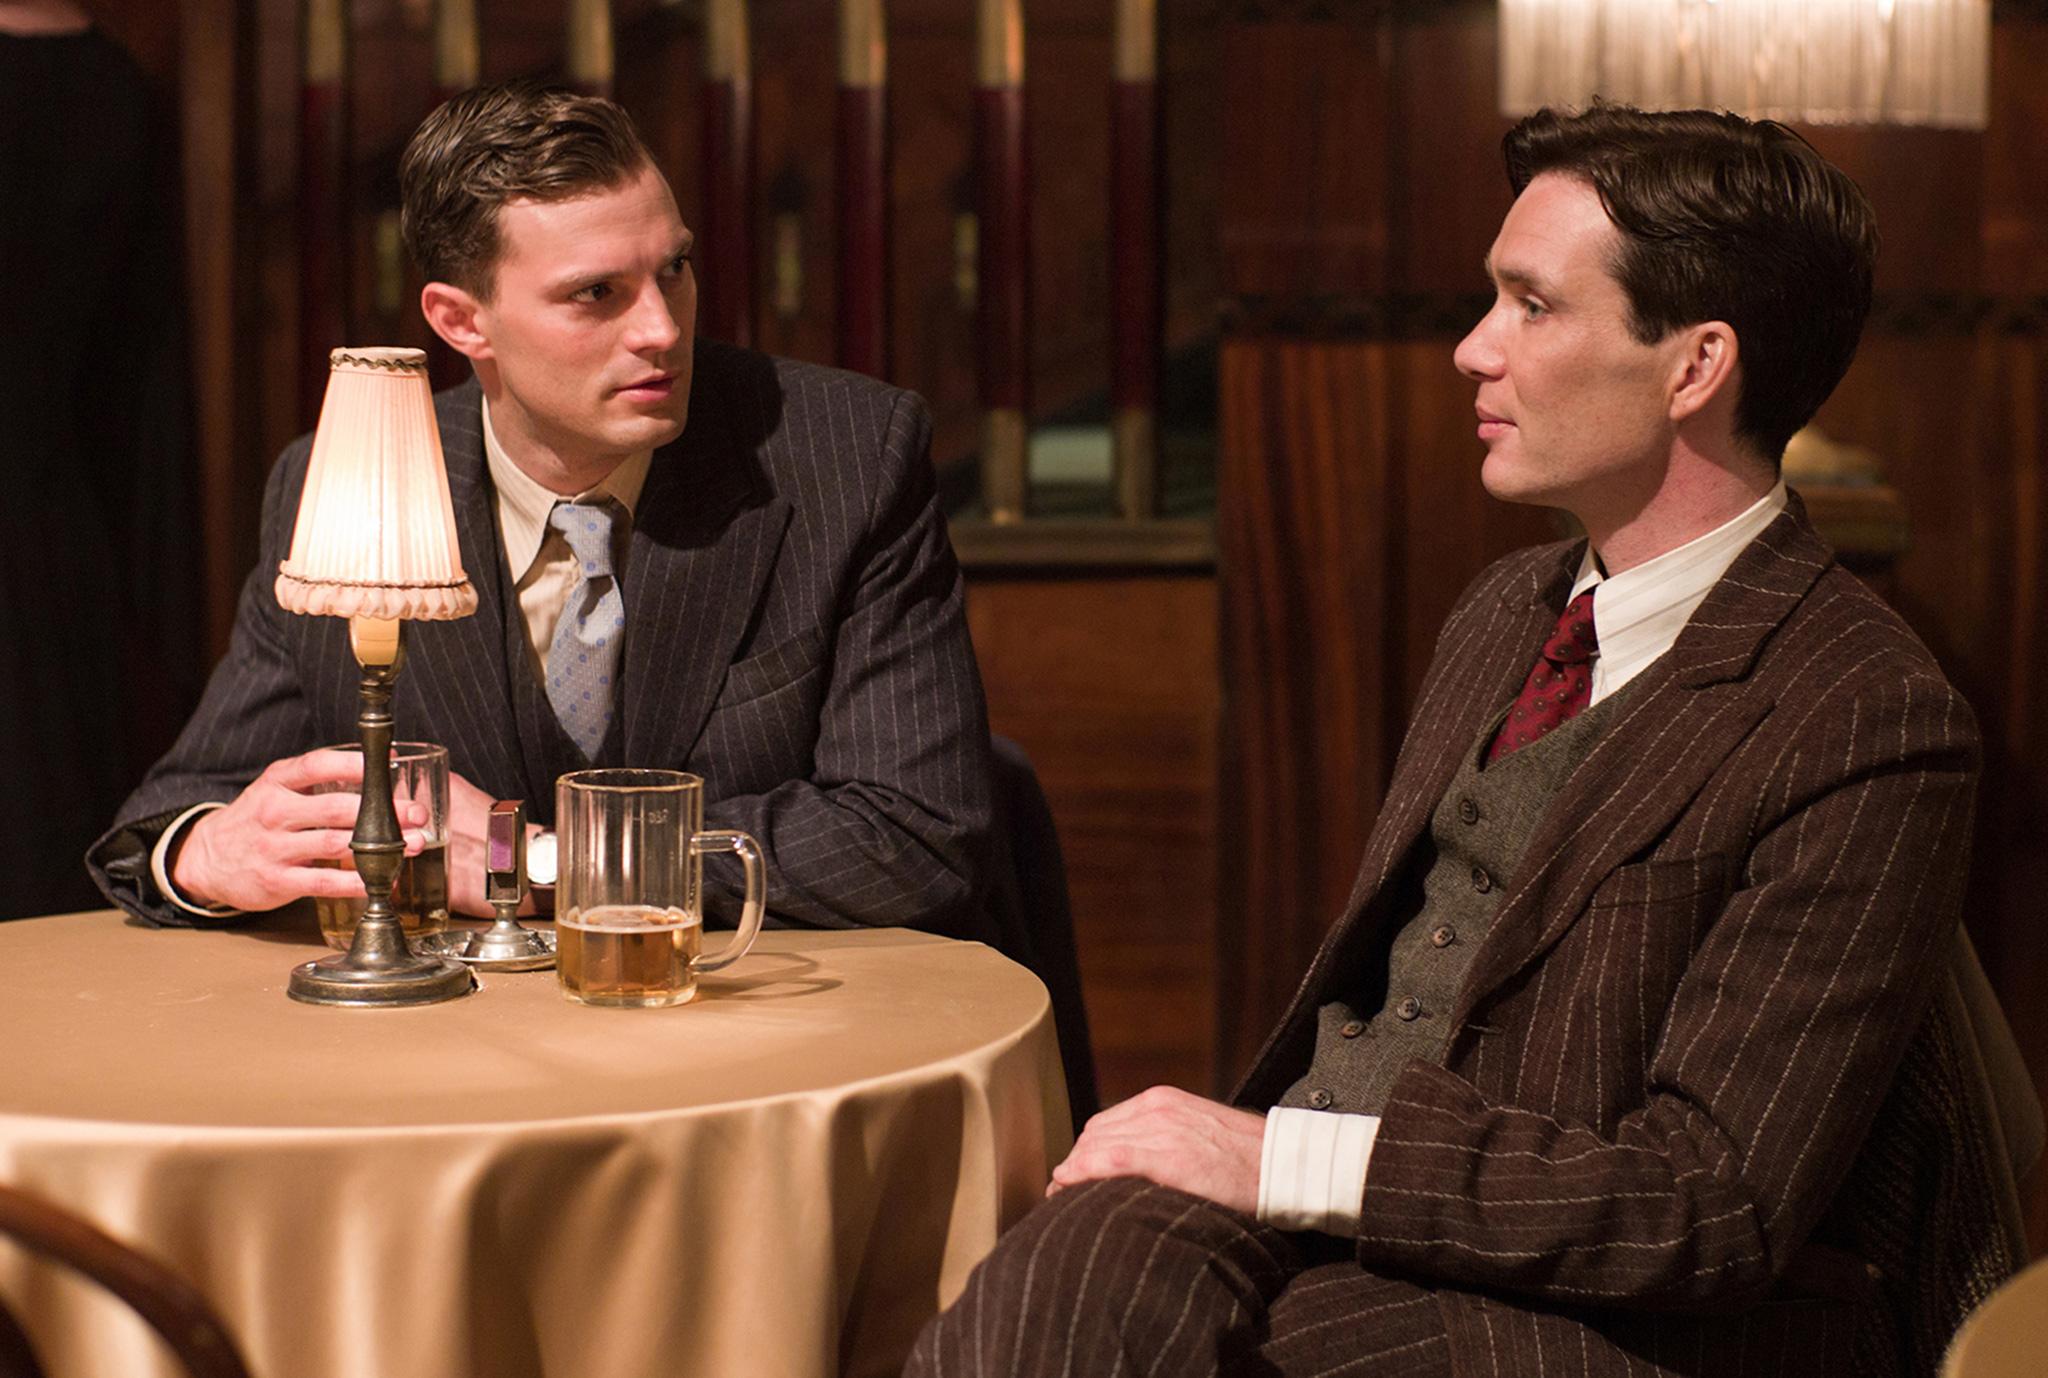 Jamie Dornan stars opposite Cillian Murphy in Anthropoid, about the Czechoslovakian resistance to the Nazis.